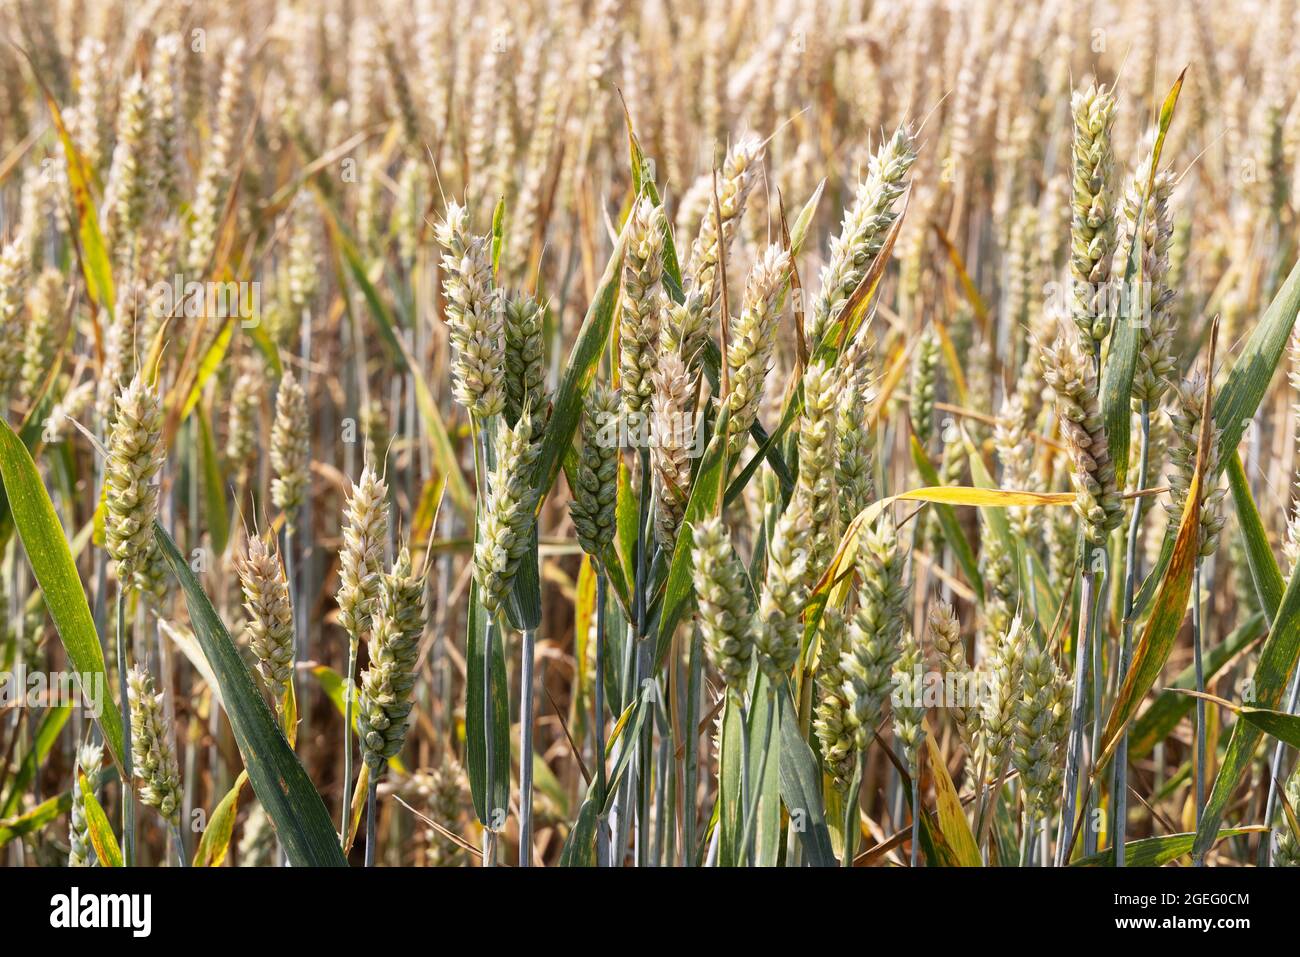 Food production: Wheat growing in a wheat field, example of arable farming and agriculture, Yorkshire England UK Stock Photo